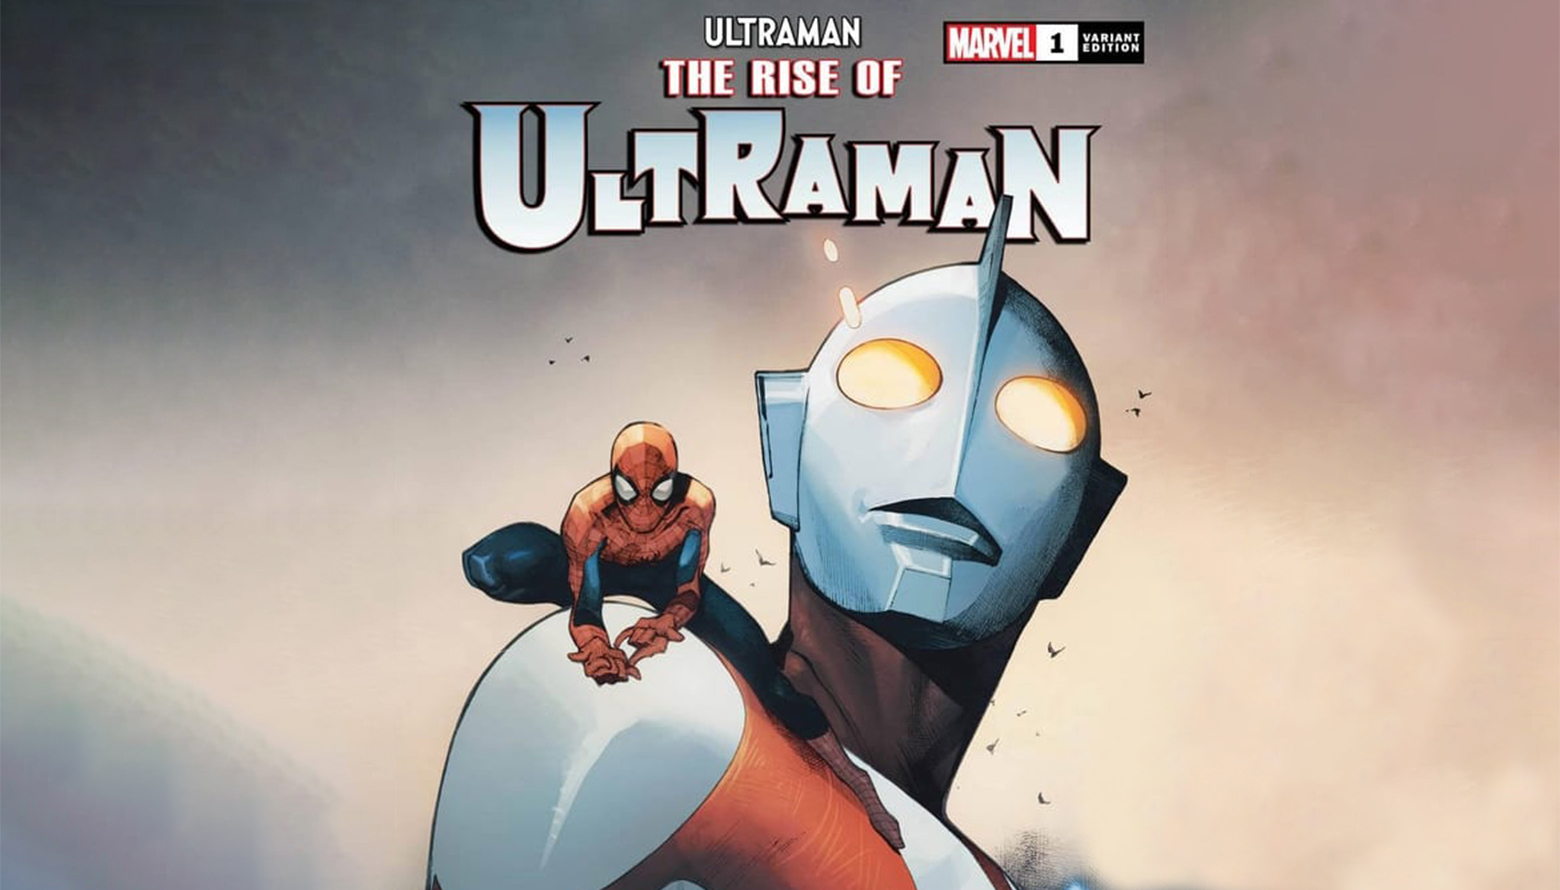 SPIDER-MAN TEAMS UP IN OLIVIER COIPEL’S VARIANT COVER FOR   ‘THE RISE OF ULTRAMAN’ #1